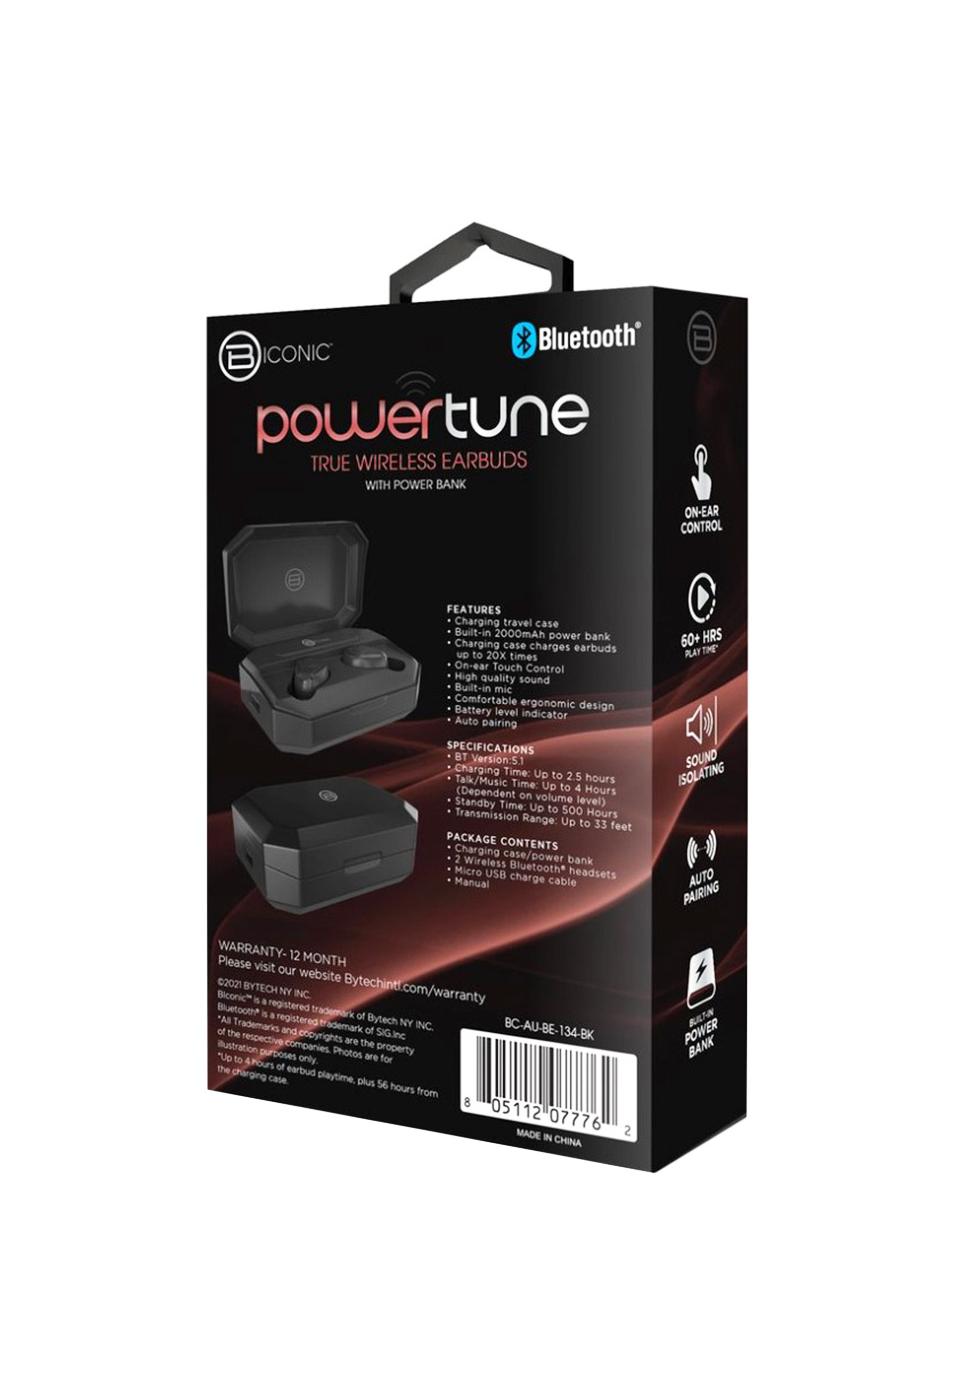 Biconic PowerTune True Wireless Earbuds with Power Bank - Black; image 2 of 2